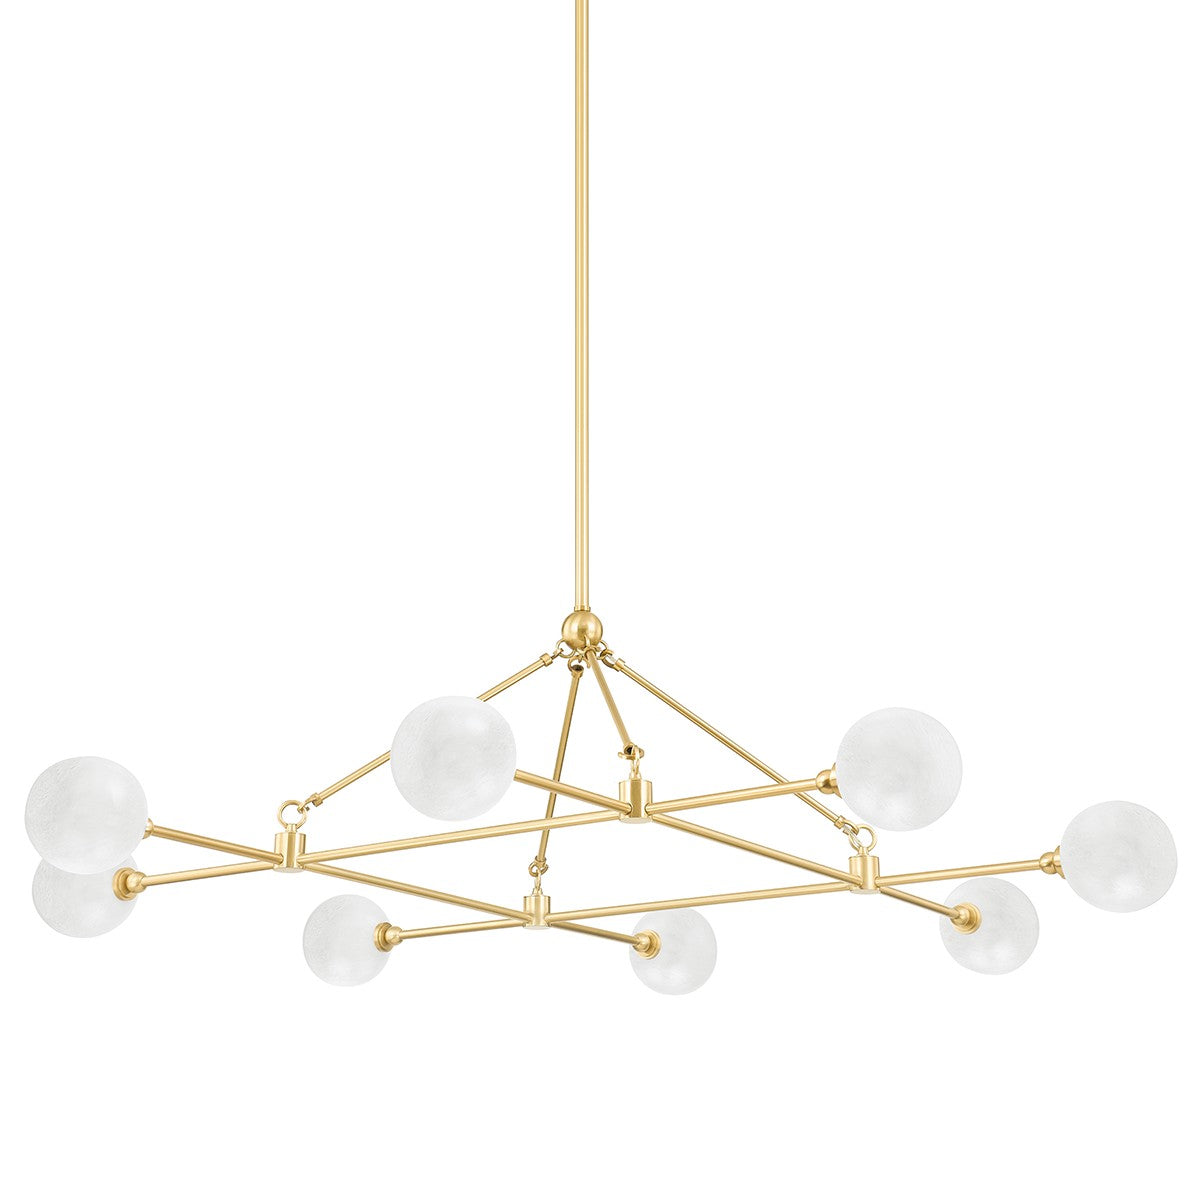 Hudson Valley - 4846-AGB - LED Chandelier - Andrews - Aged Brass